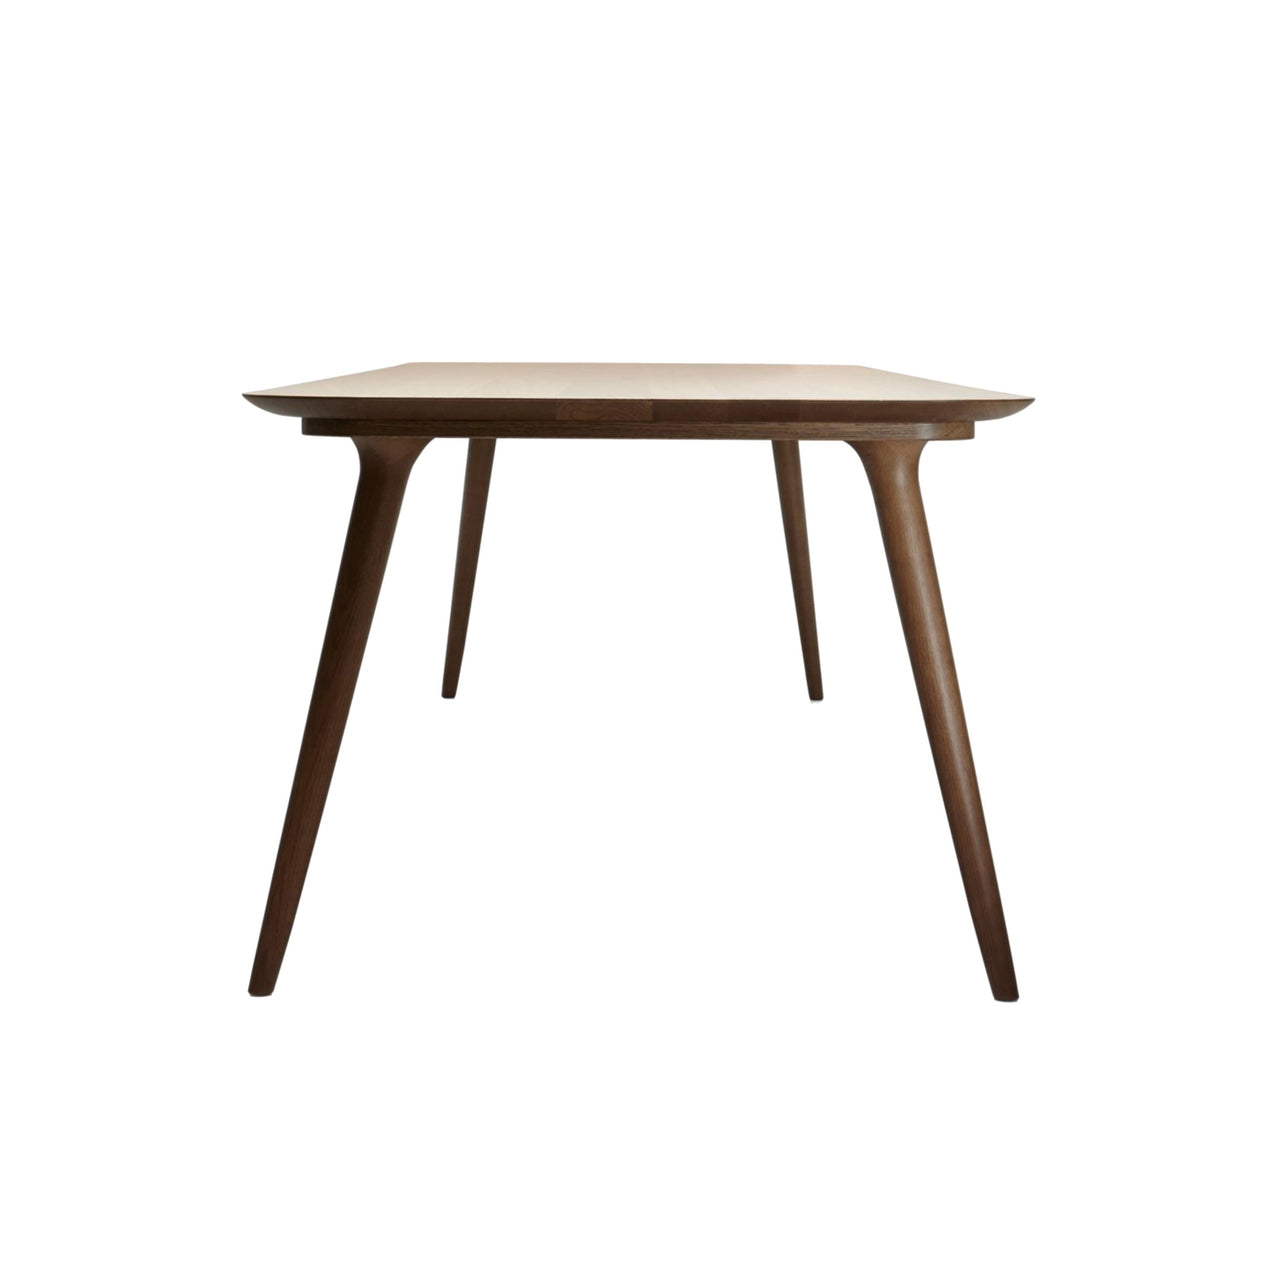 Zio Dining Table: Large - 122